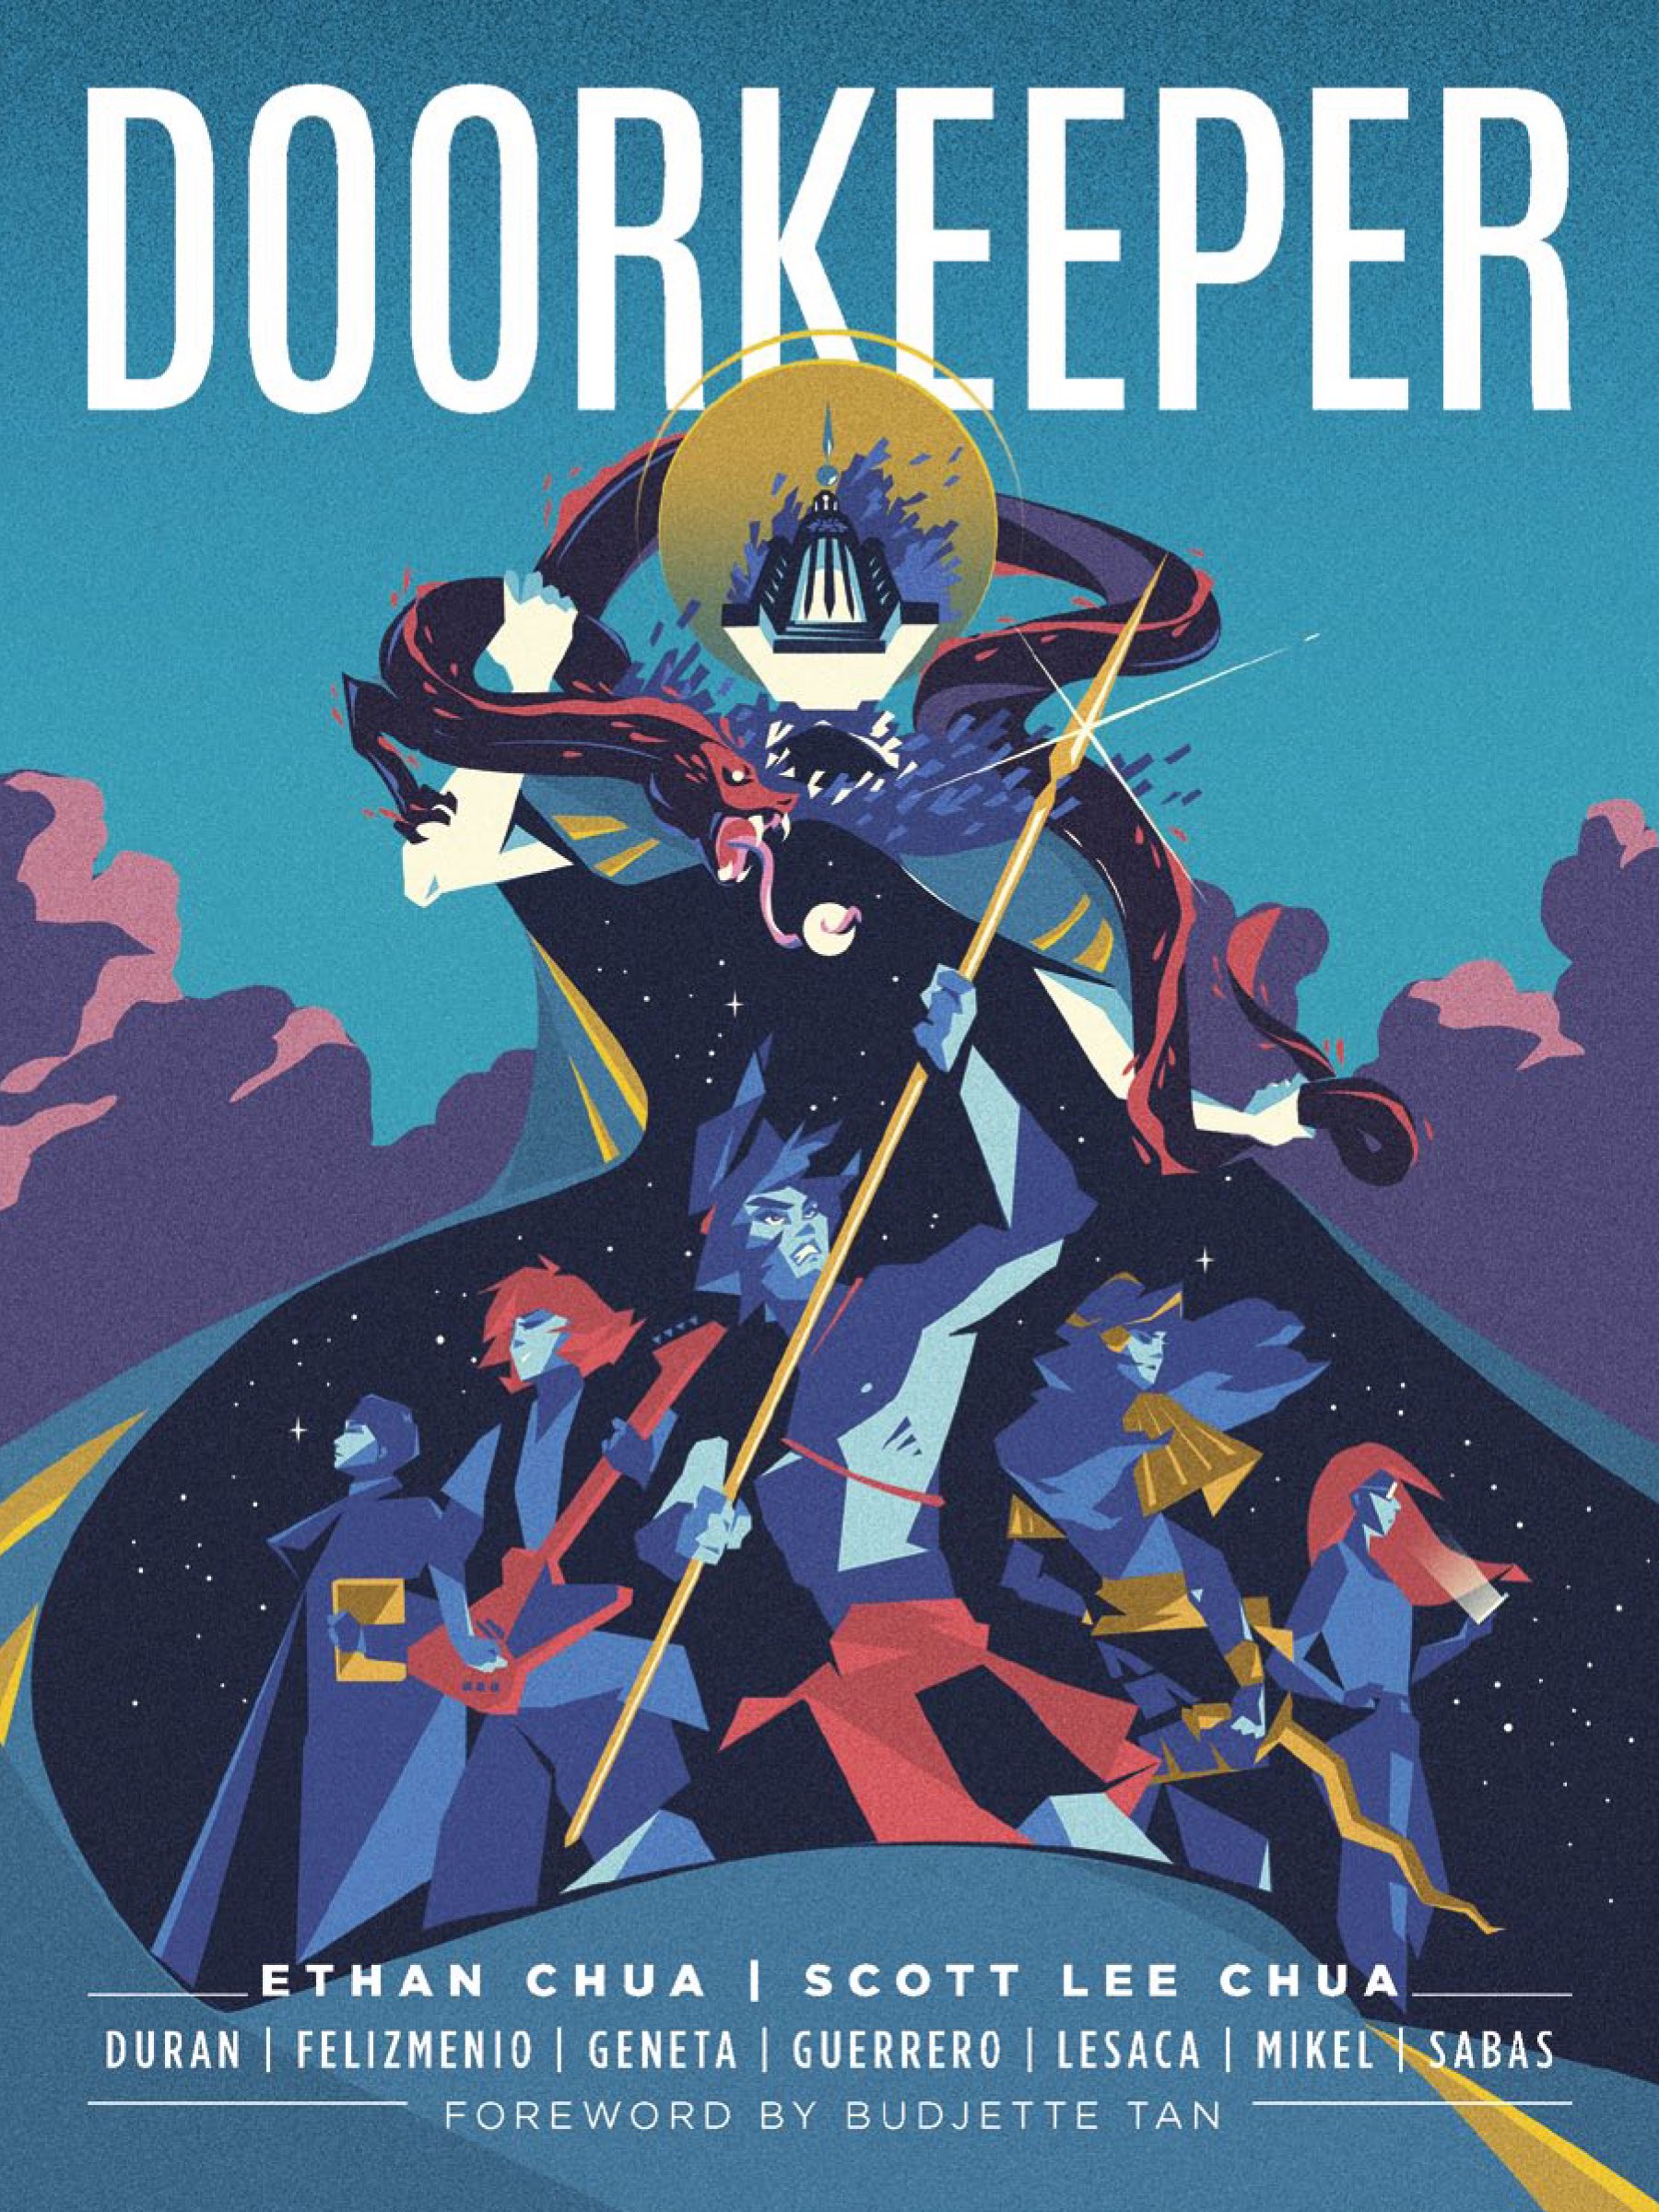 Cover page of Doorkeeper written by Ethan Chua and Scott Lee Chua. Next line. Surnames of artists, from left to right. Duran, Felizmenio, Geneta, Guerrero, Lesaca, Mikel, Sabas. Next line. Foreword by Budjette Tan. The cover is a painting of a robed entity with a door for a head grabbing a thin red dragon that is swallowing the moon. Within the robes are five characters standing side by side. From left to right. Man in priest robes holding book. Woman holding electric guitar. Strong man holding spear. Woman in armor holding a sword. Woman with glasses looking at her phone.